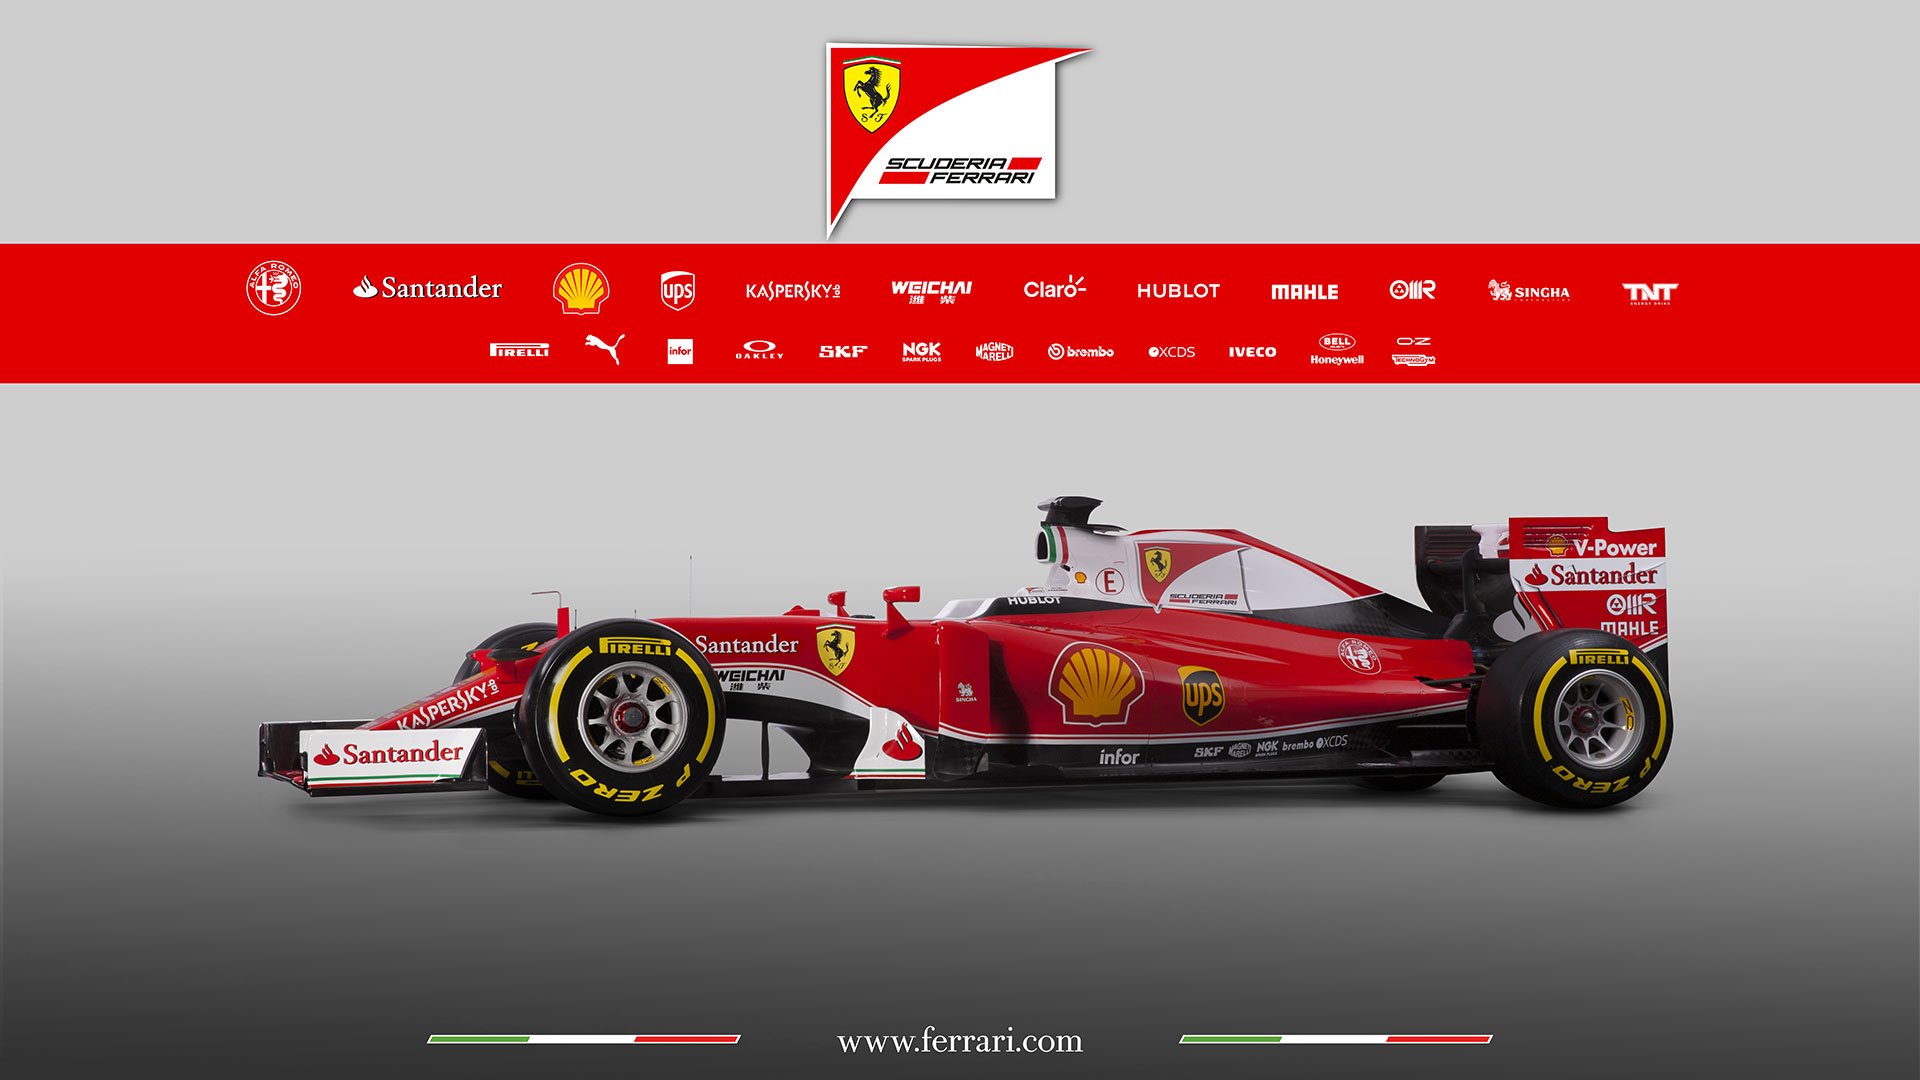 SJB Classic Article - Ferrari and Williams Launch their 2016 F1 Cars, the SF16-H and the FW38